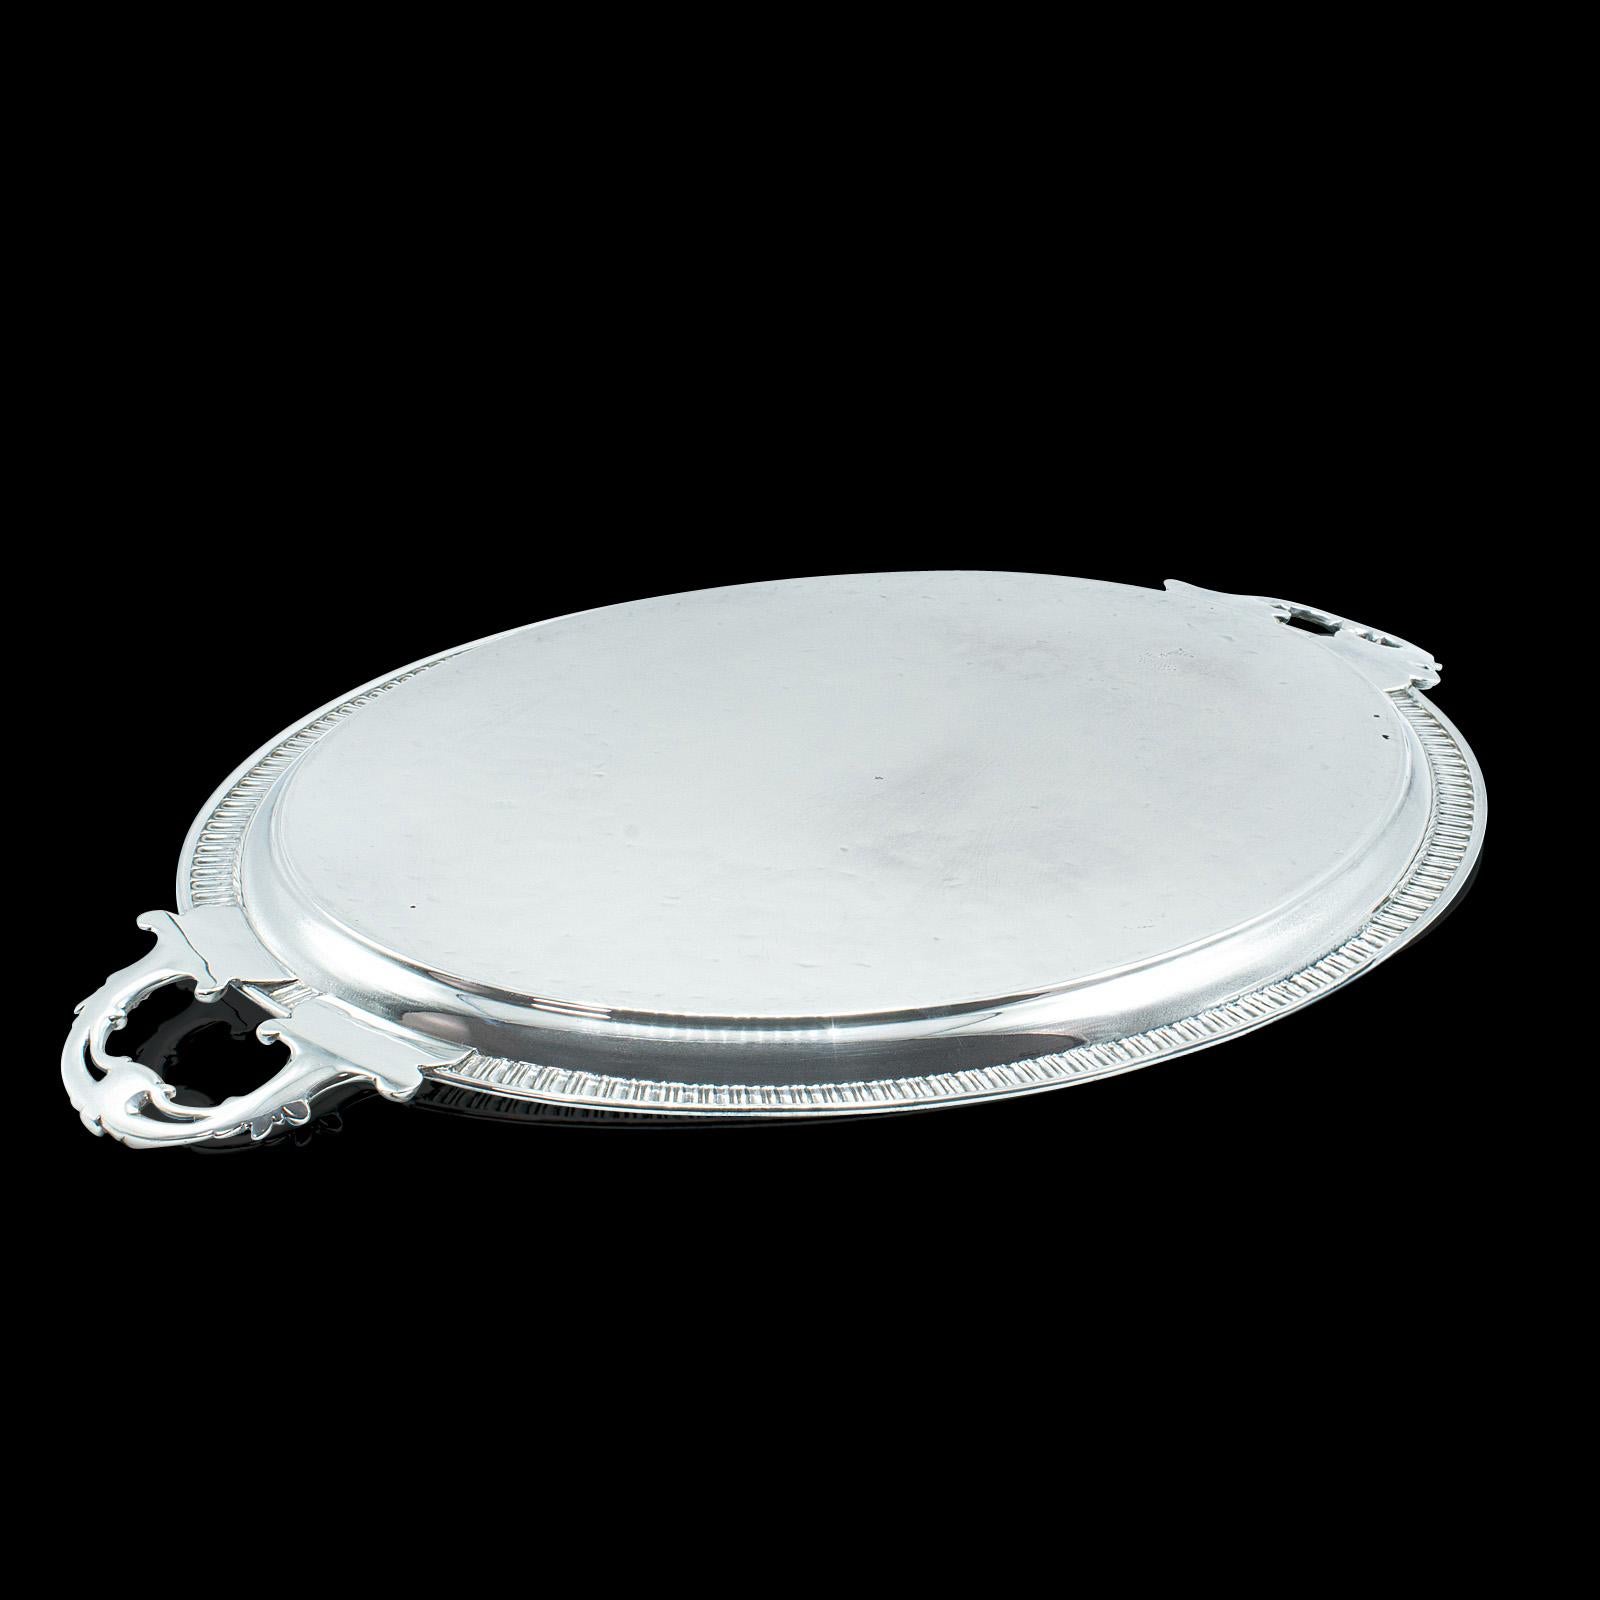 Antique Oval Decorative Serving Tray, English, Silver Plate, Afternoon Tea, 1910 In Good Condition For Sale In Hele, Devon, GB